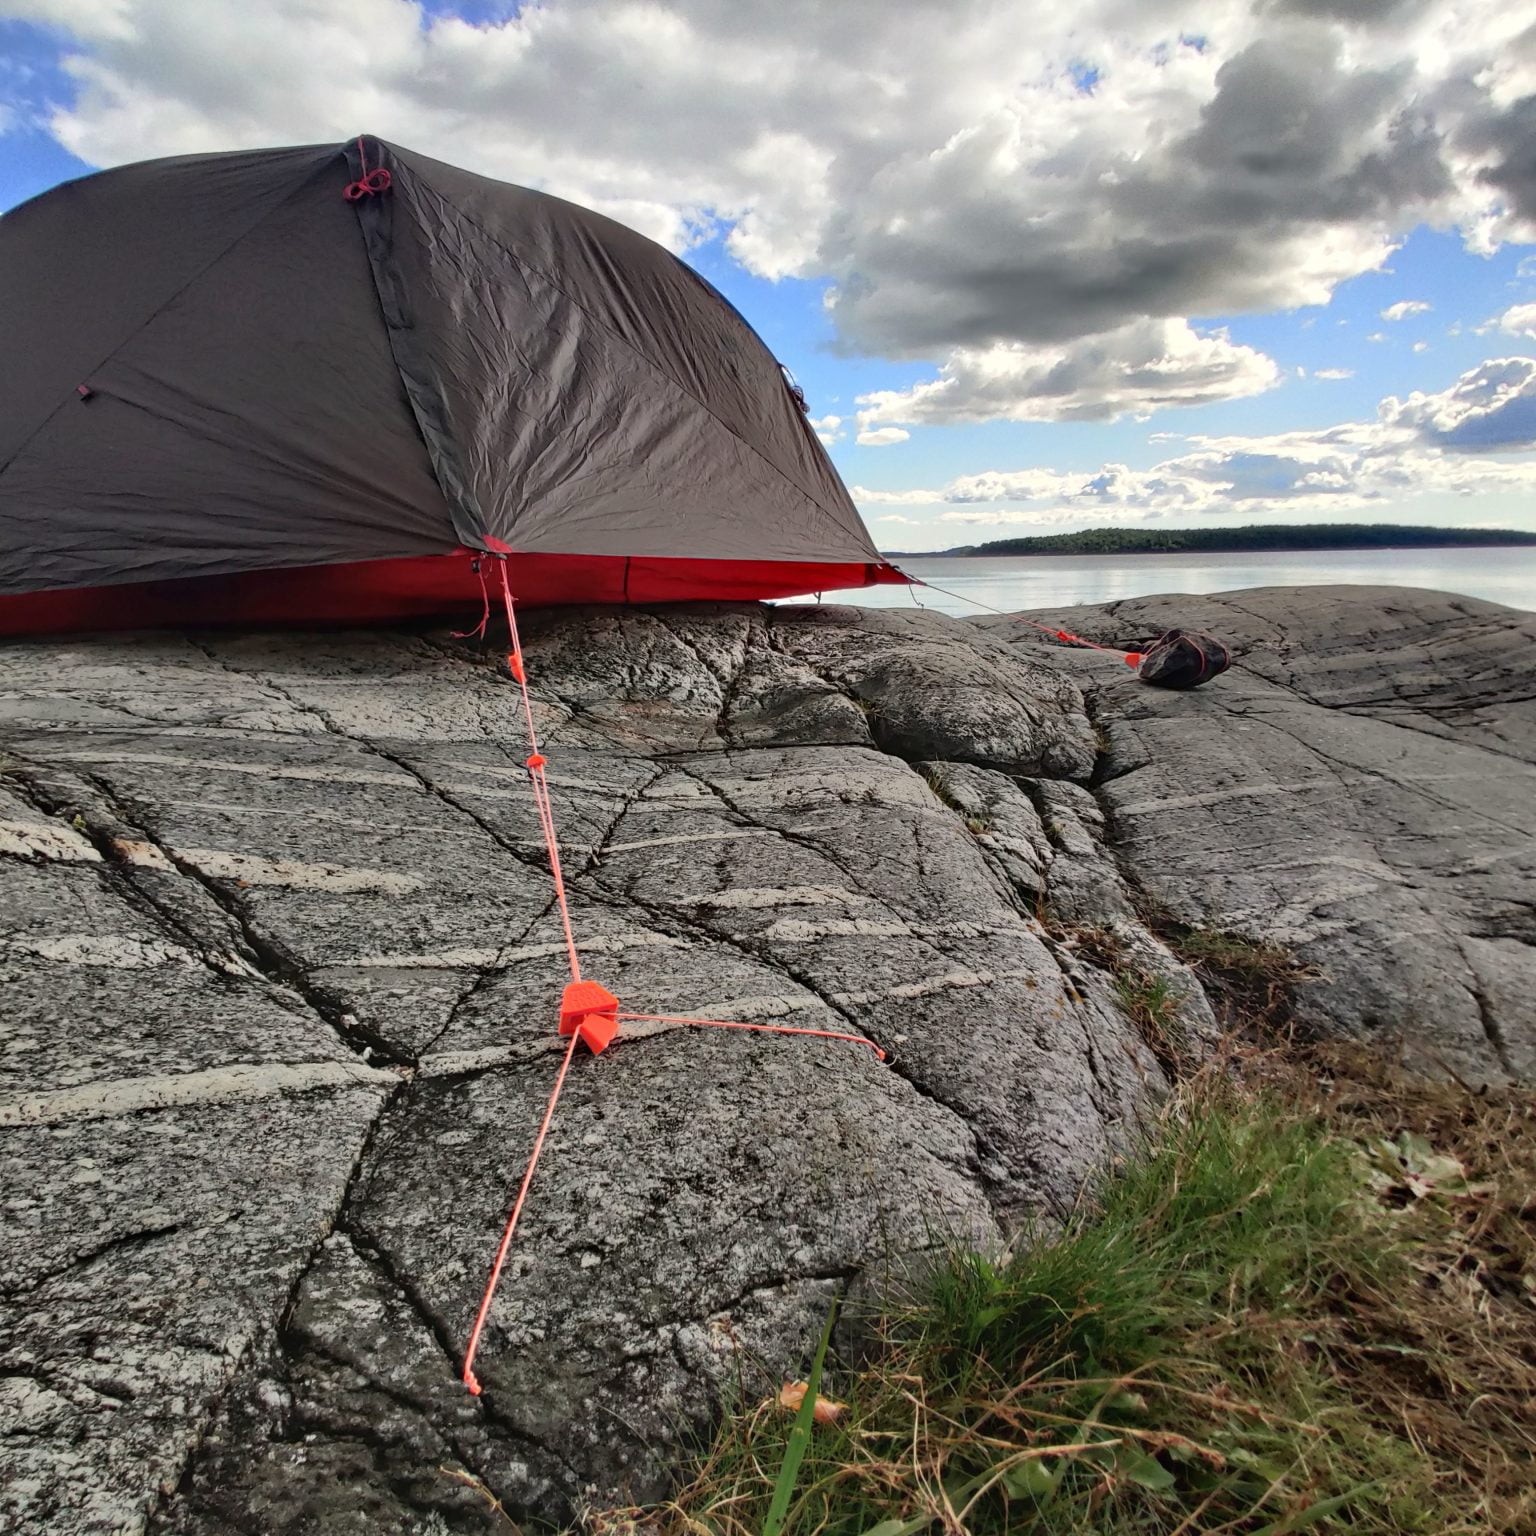 MSR tent pitched on rocks using Tent Block